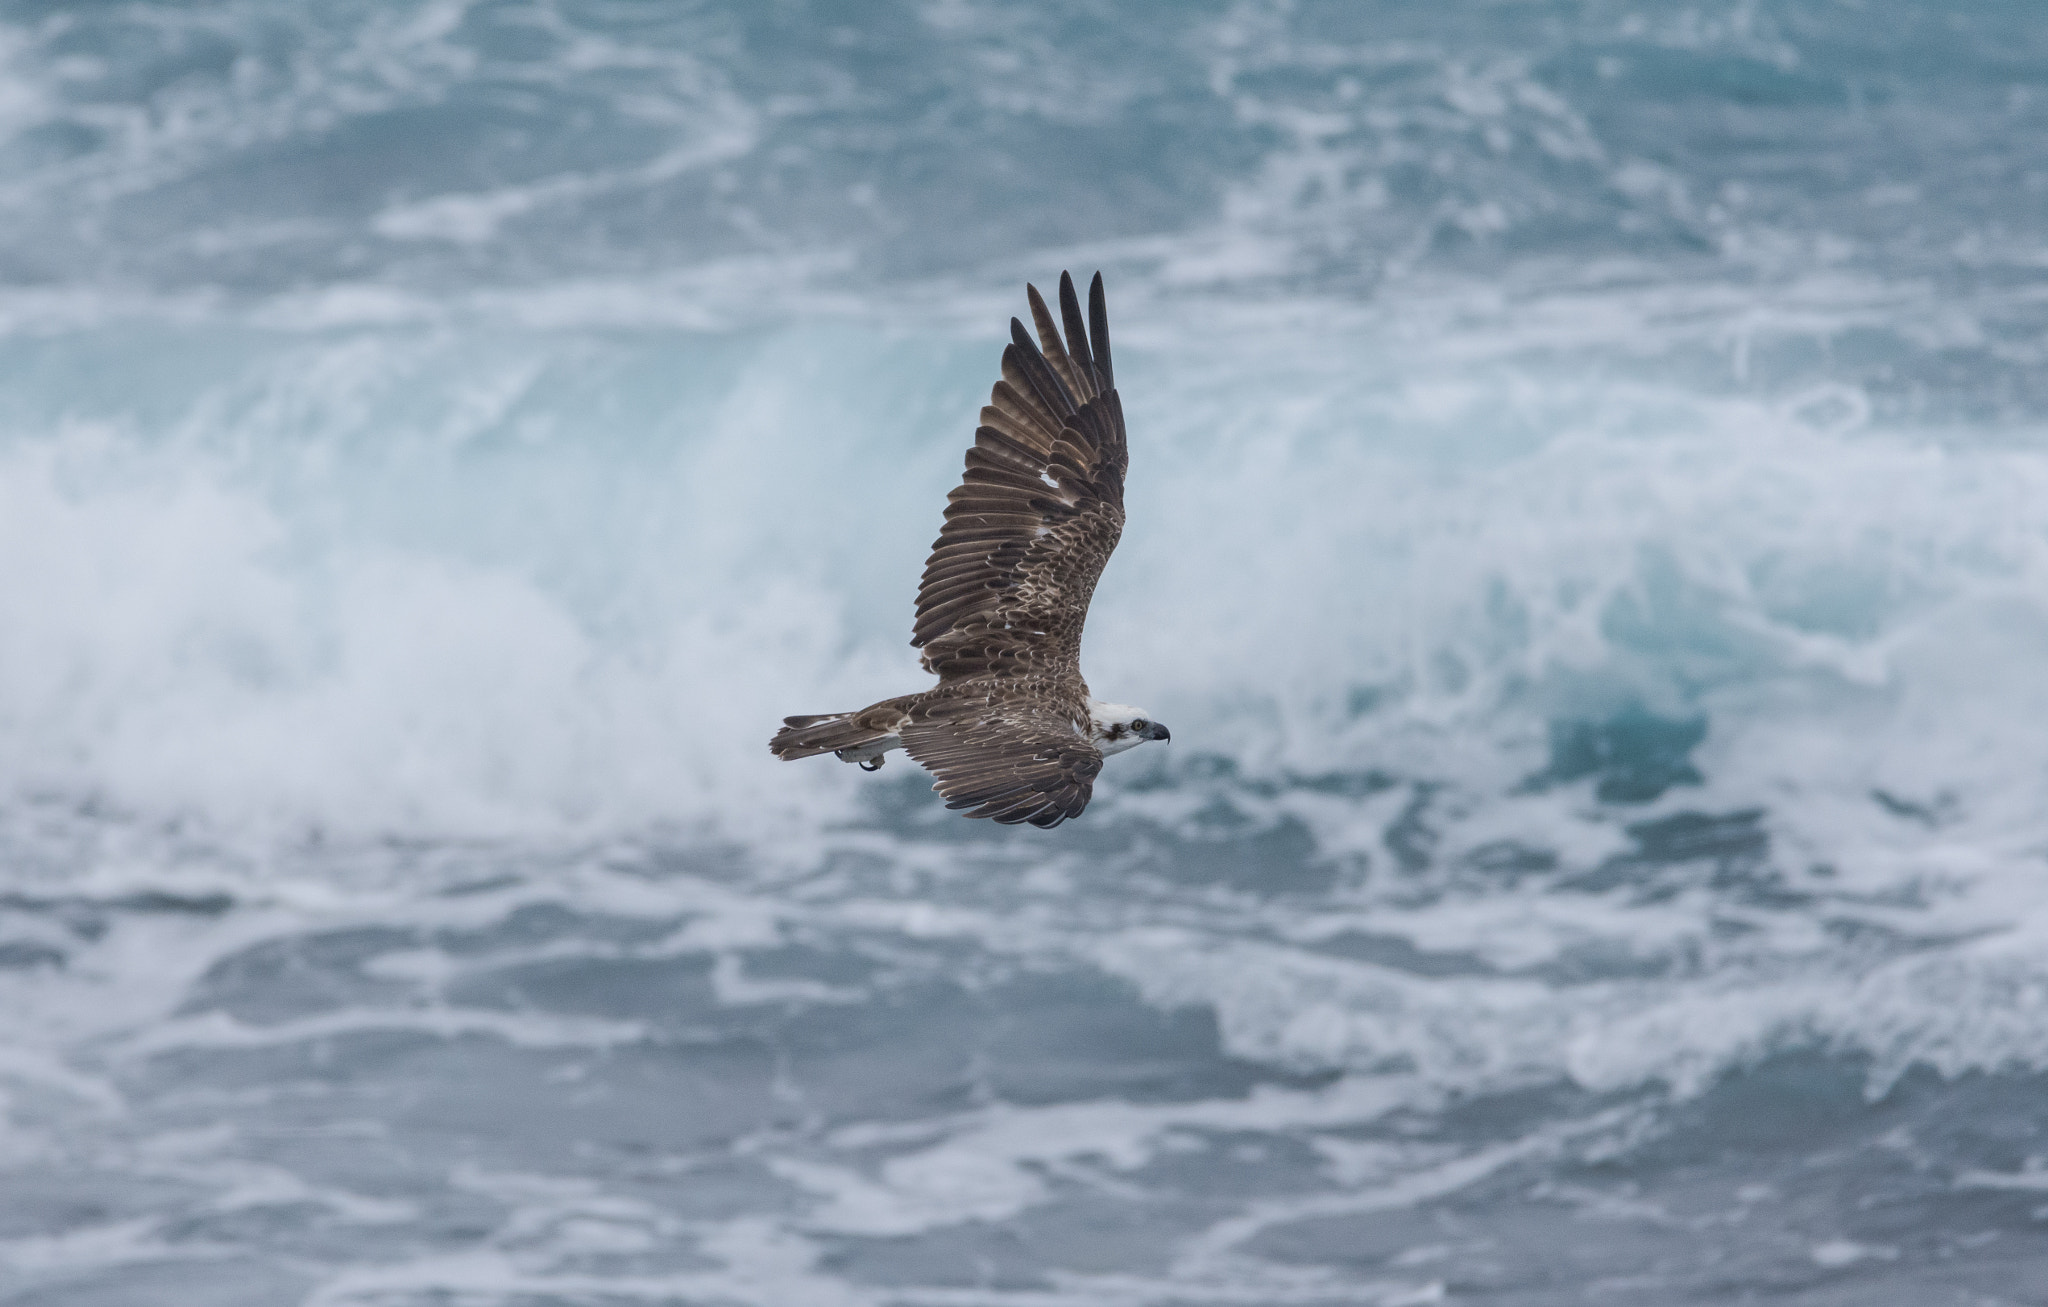 Nikon D7200 + Sigma 150-600mm F5-6.3 DG OS HSM | C sample photo. Fly with me trough the storm photography